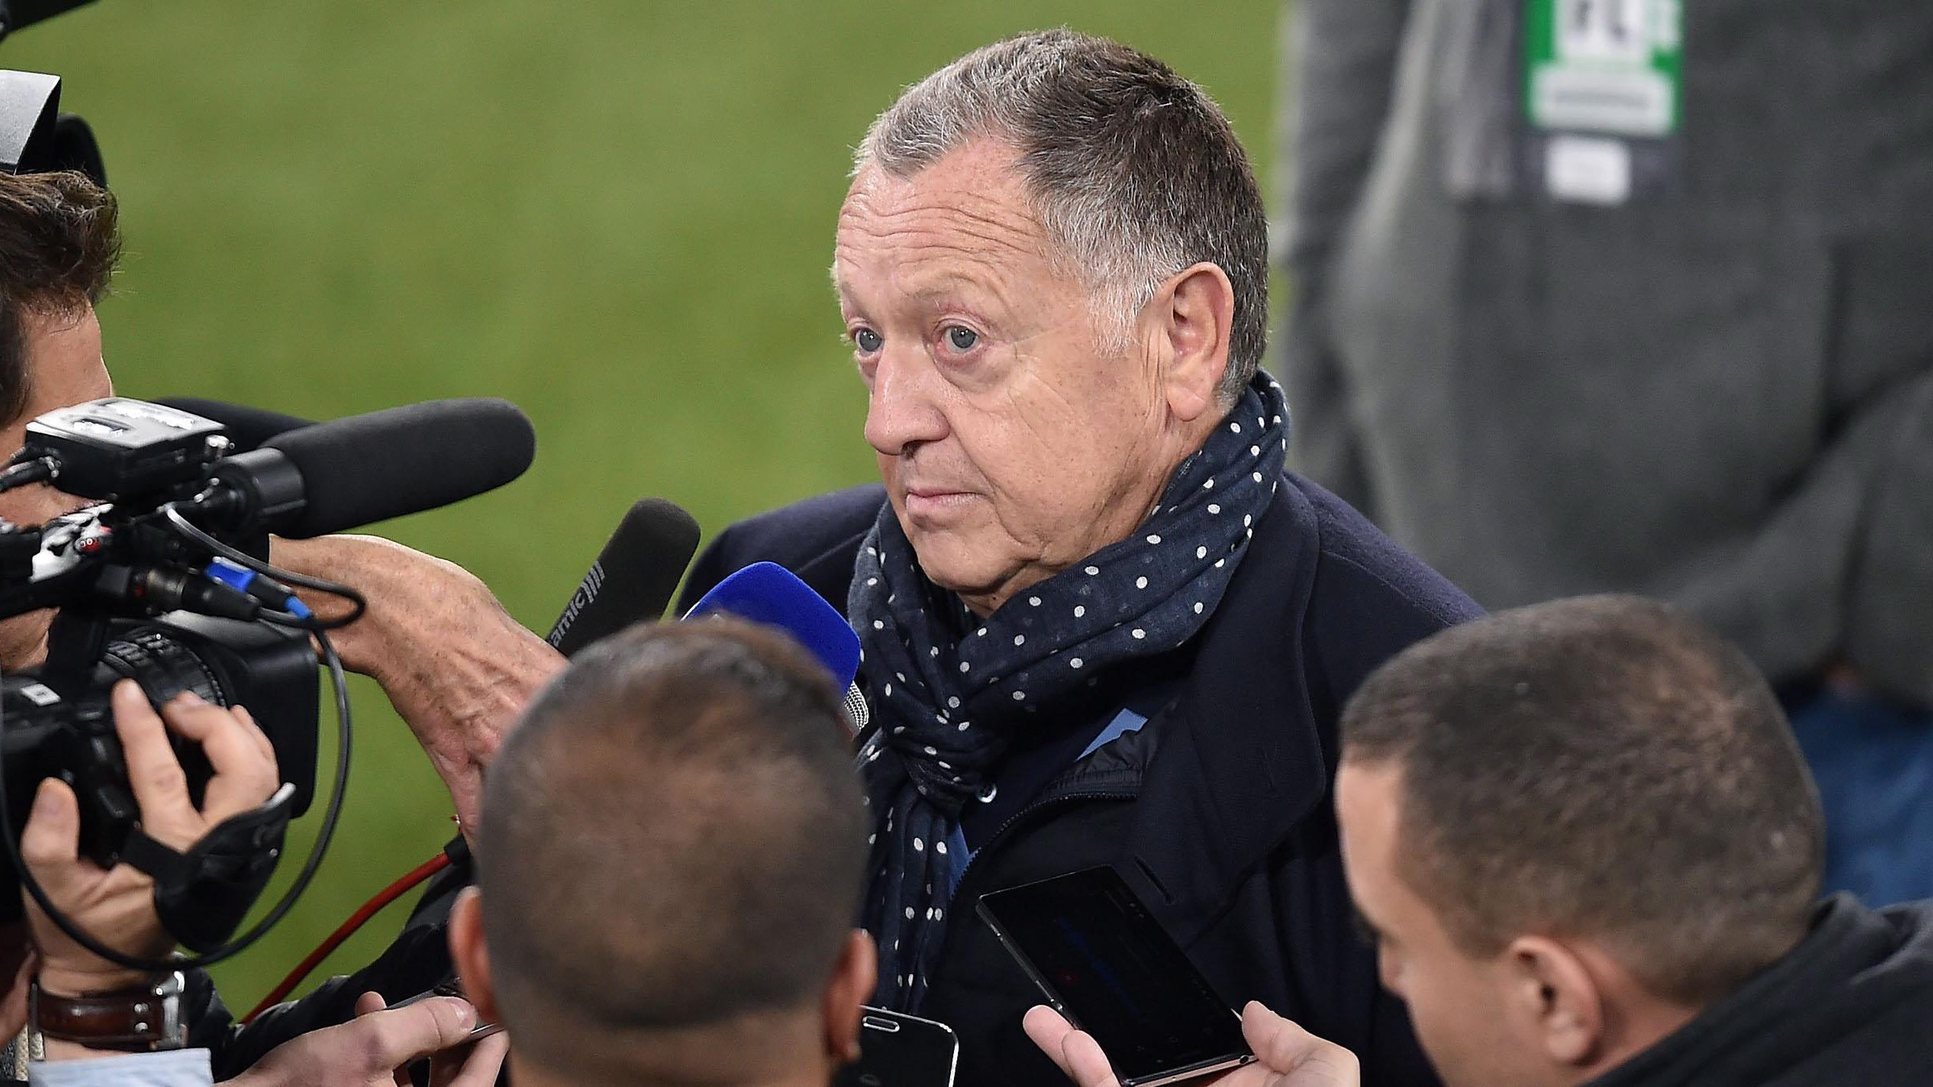 epa05612877 Olympique Lyon&#039;s President Jean-Michel Aulas during the team training section at the Juventus Stadium in Turin, Italy, 01 November 2016. Juventus FC will face Olympique Lyon in the UEFA Champions League group H soccer match on 02 November.  EPA/ALESSANDRO DI MARCO